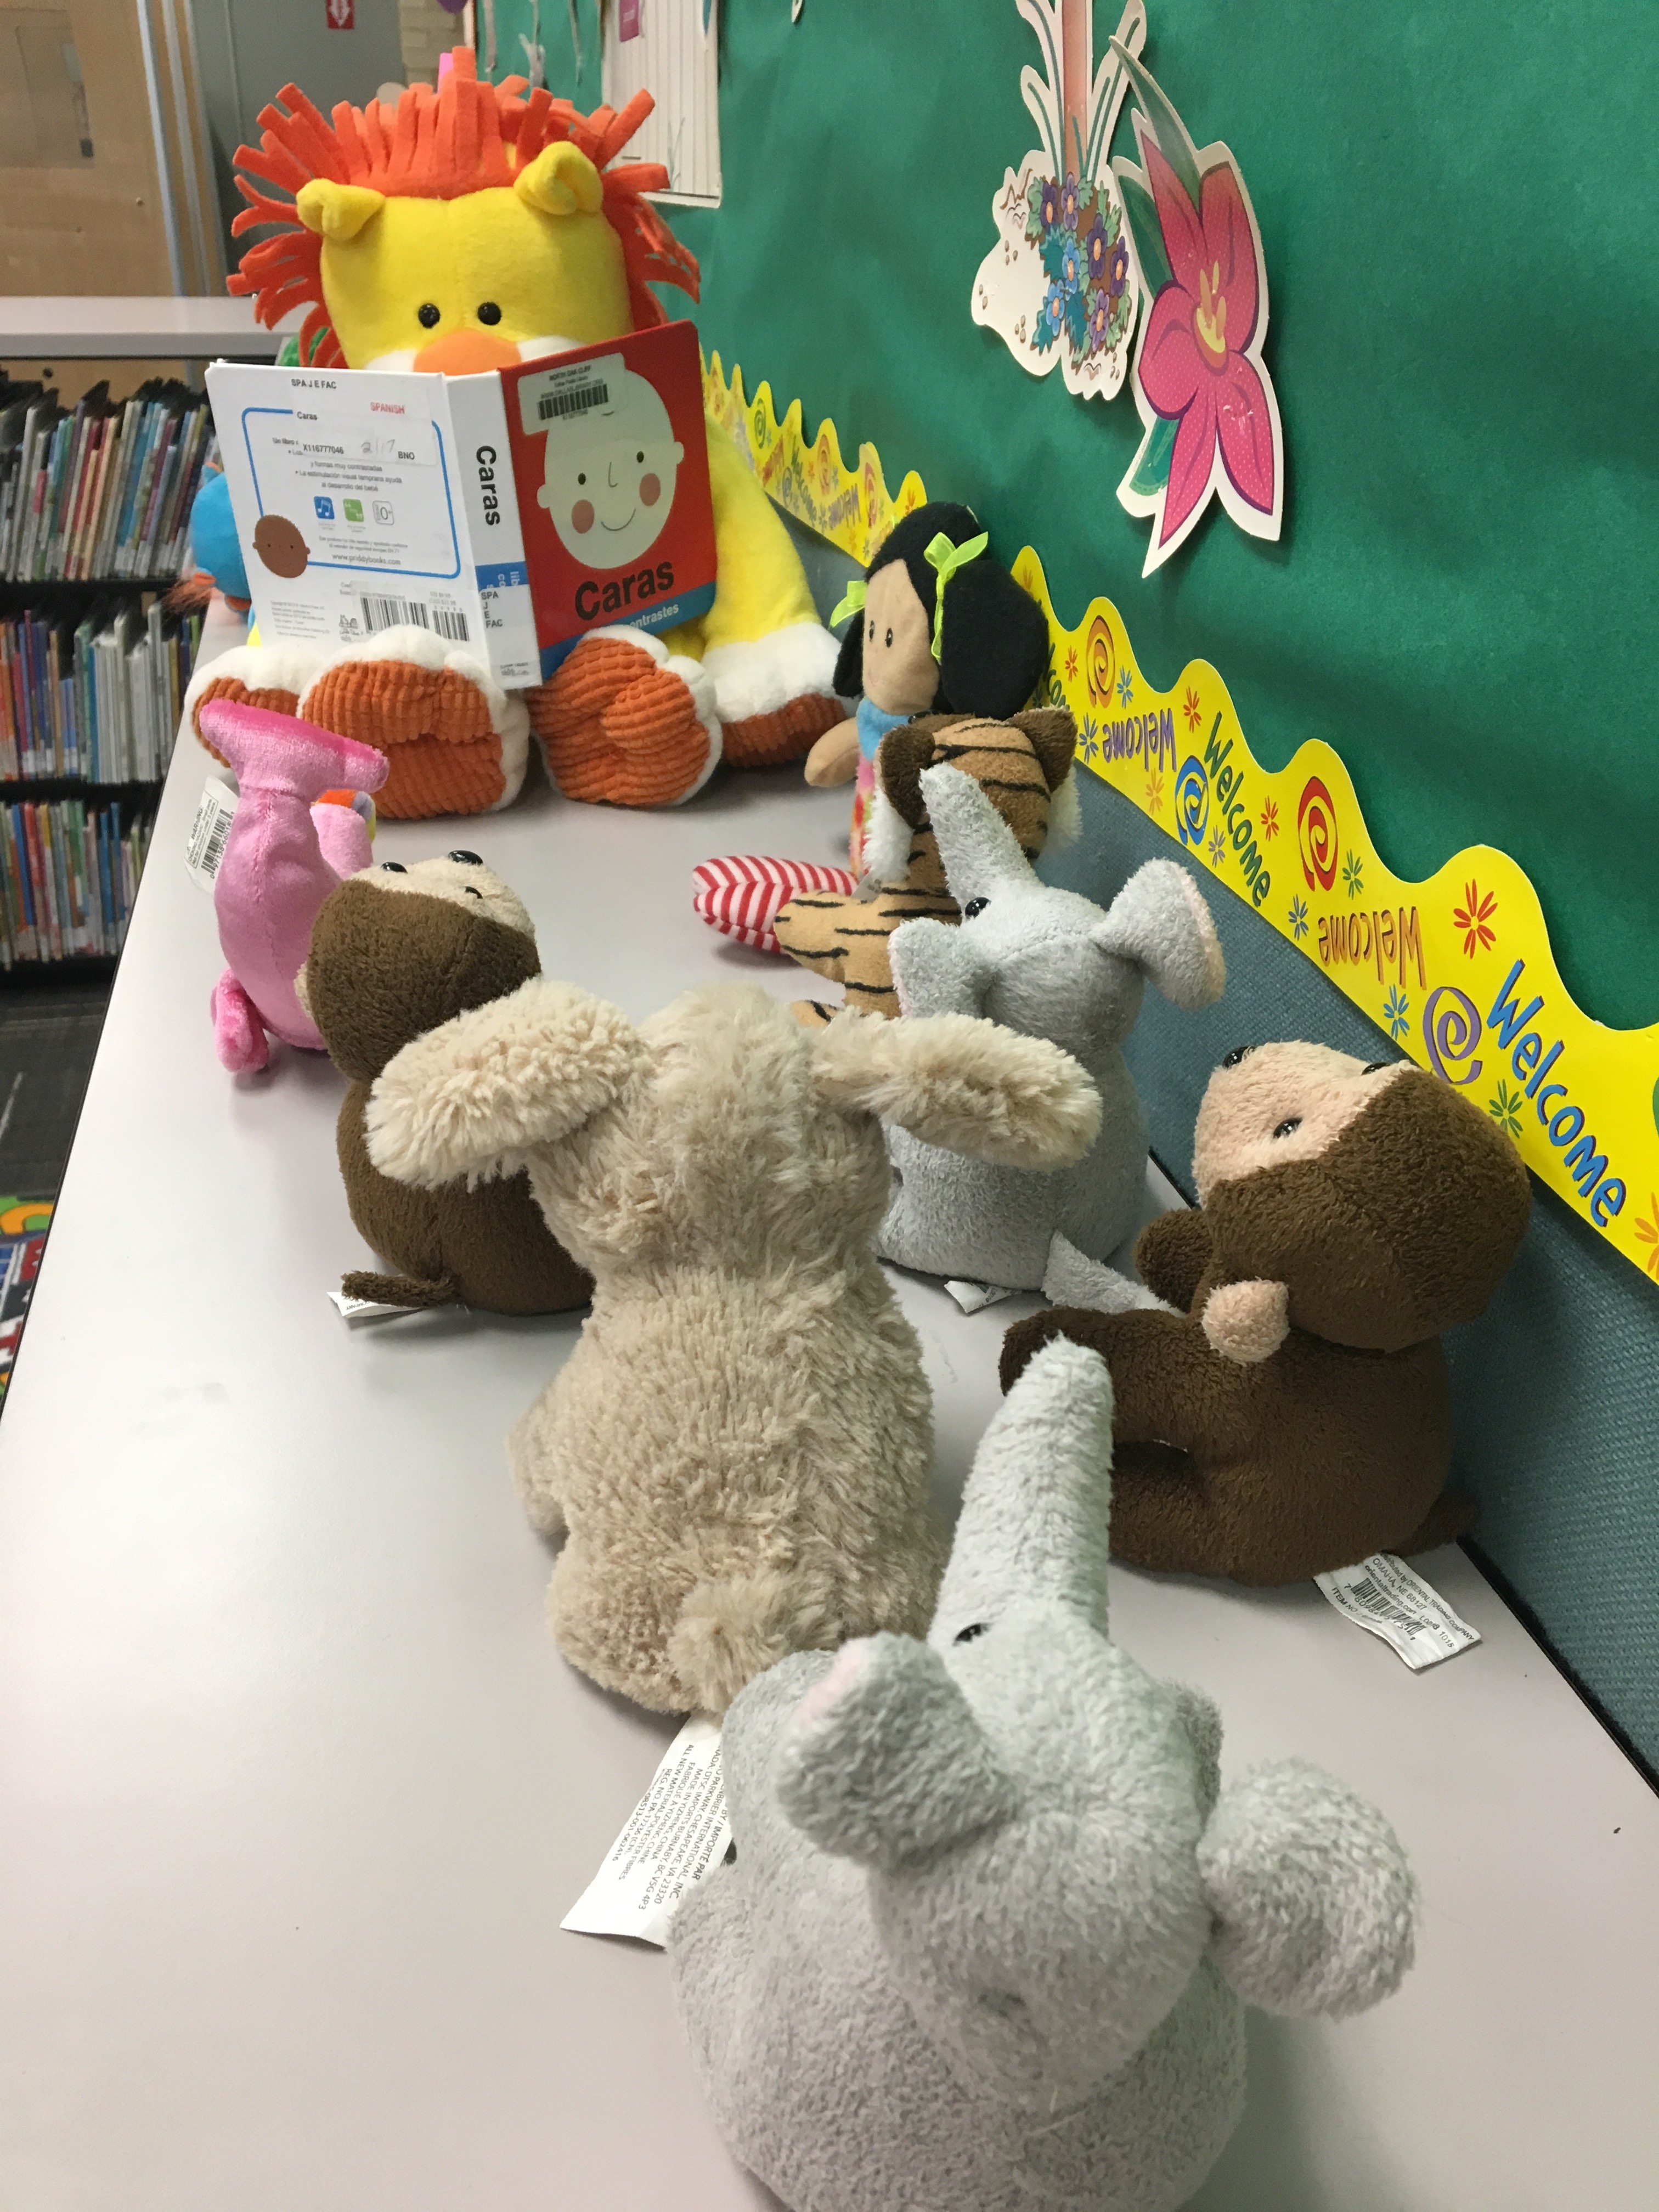 Stuffed animals in children's area holding picture books